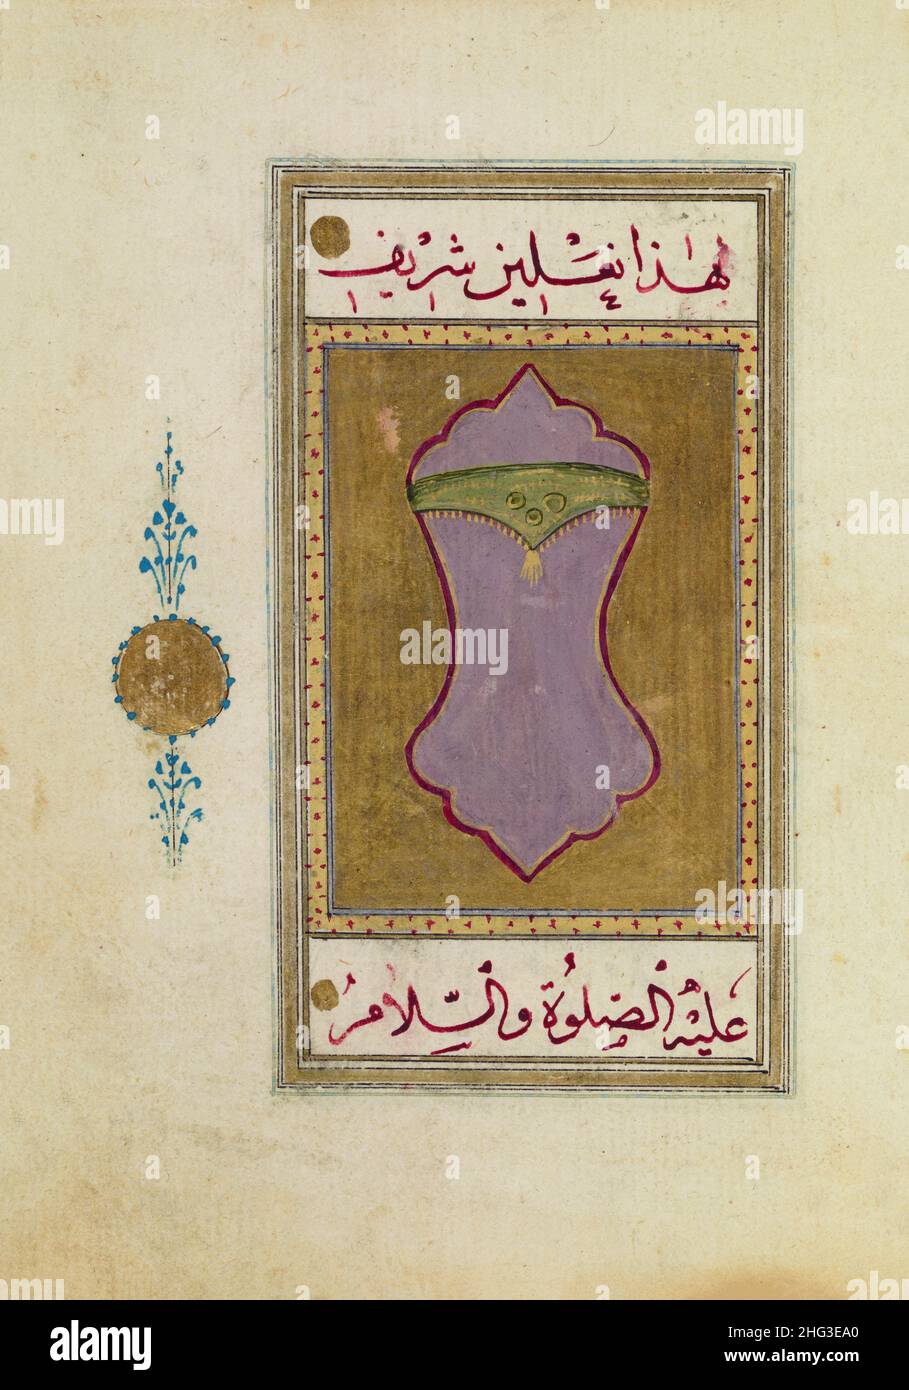 Color illumination from antique arabic manuscripts: The sandals (naʻlayn) of the Prophet. 1874 Stock Photo